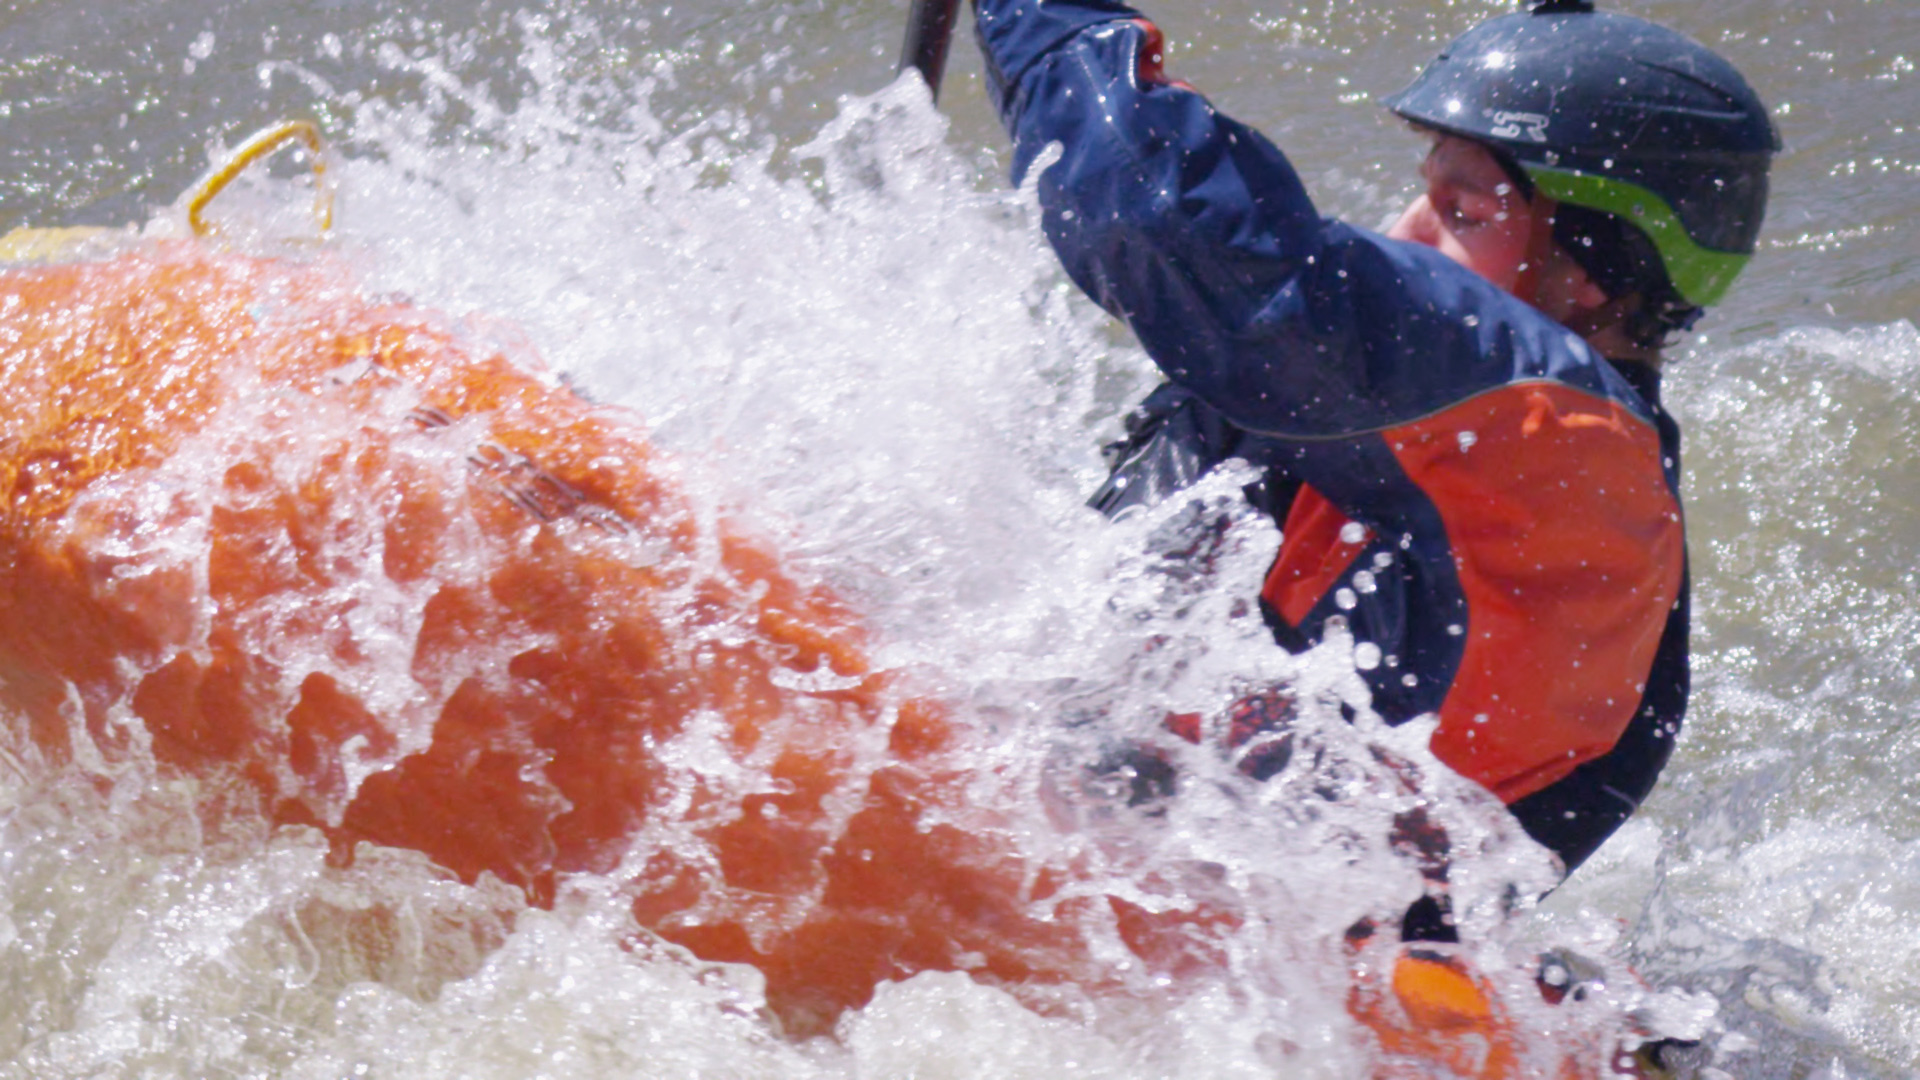 Man white water rafting.  Water is splashing up over him and as he is paddling